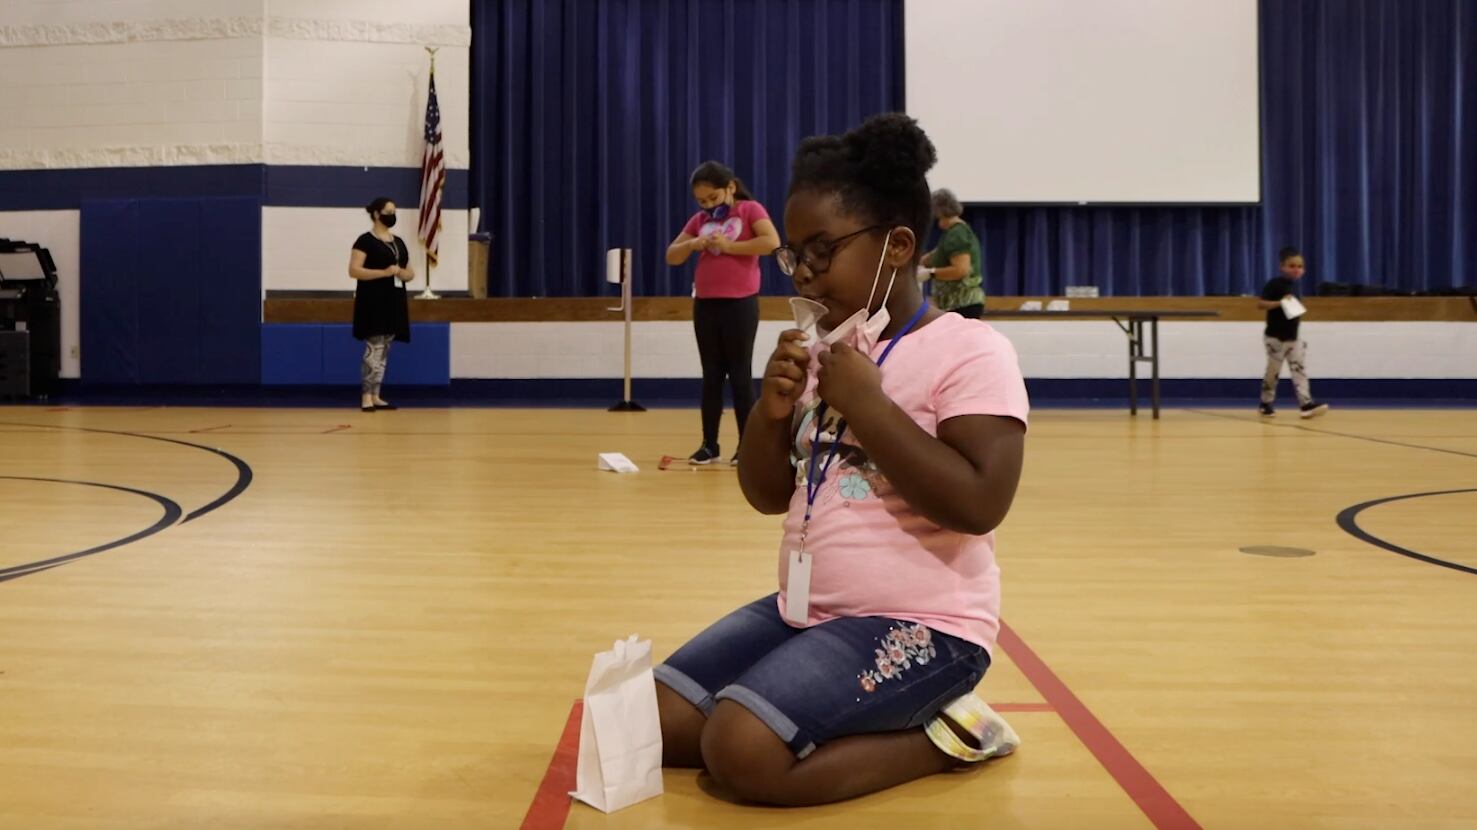 A young girl produces a saliva sample for a SHIELD COVID test inside of a large gymnasium.